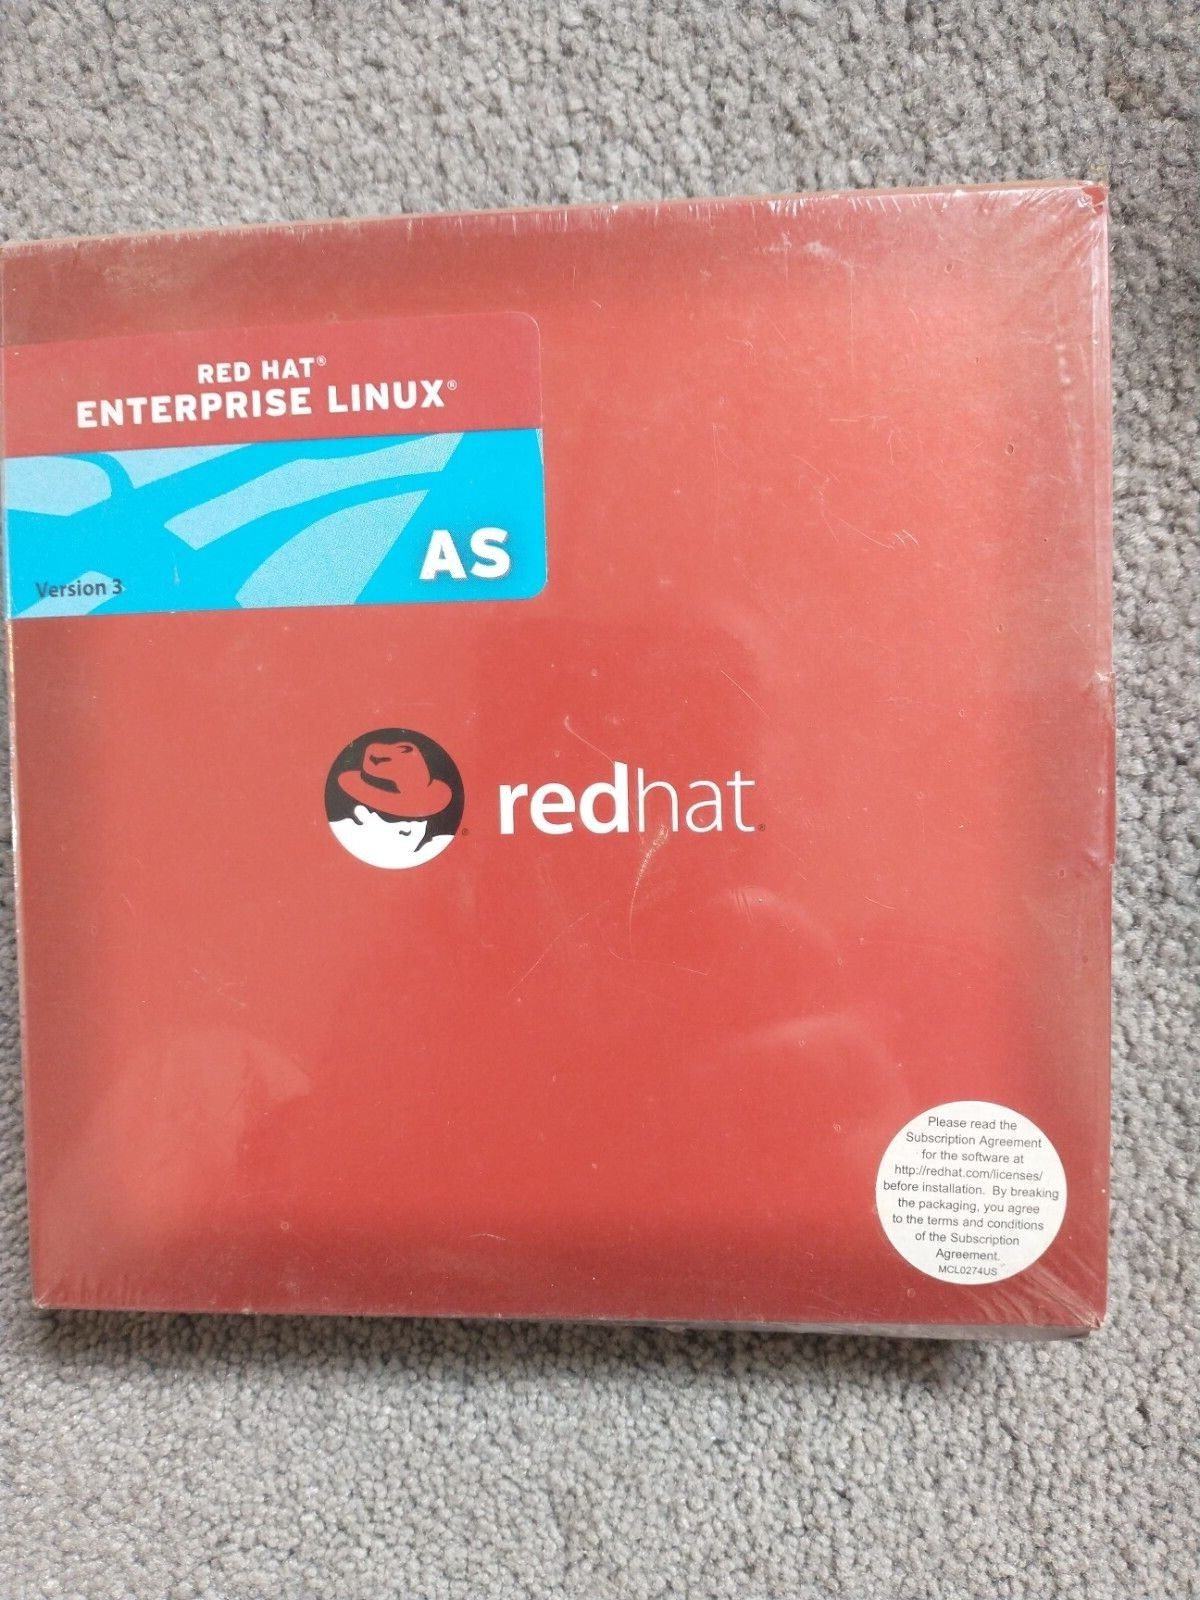 Red Hat Enterprise Linux AS Version 3, Sealed but box is dented